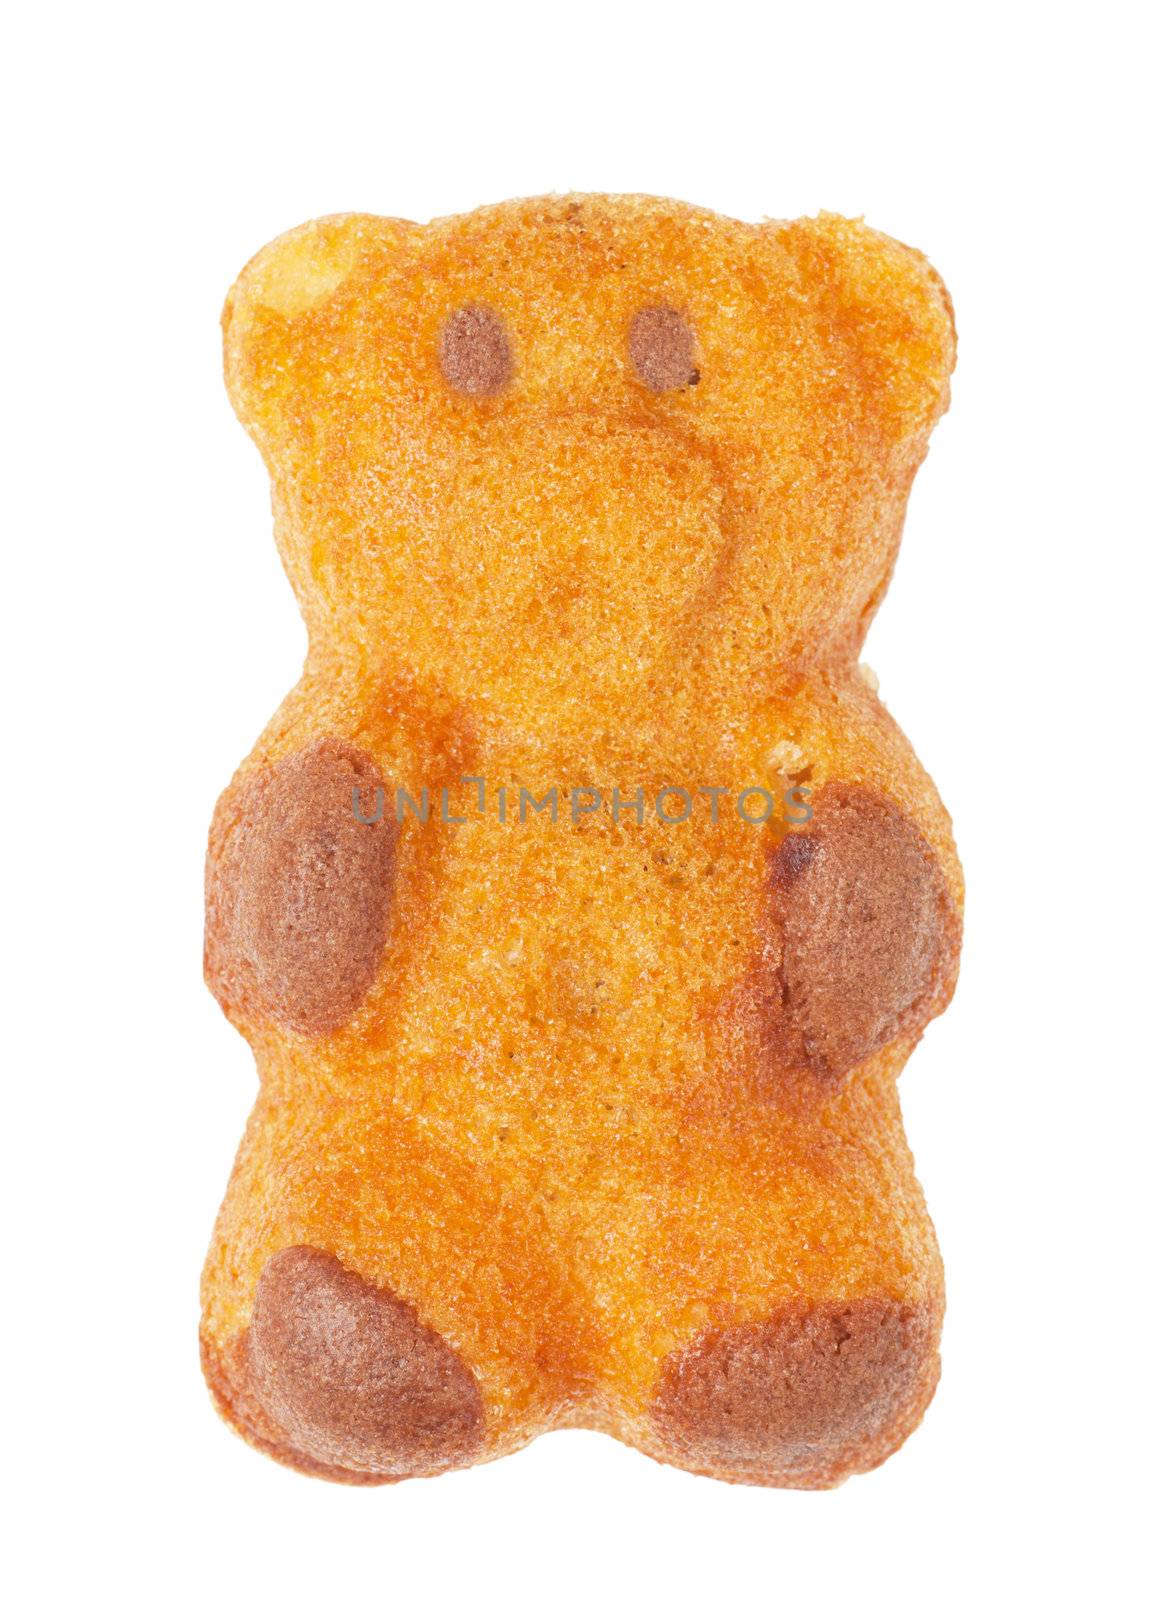 Bear-shaped cookie isolated over white background